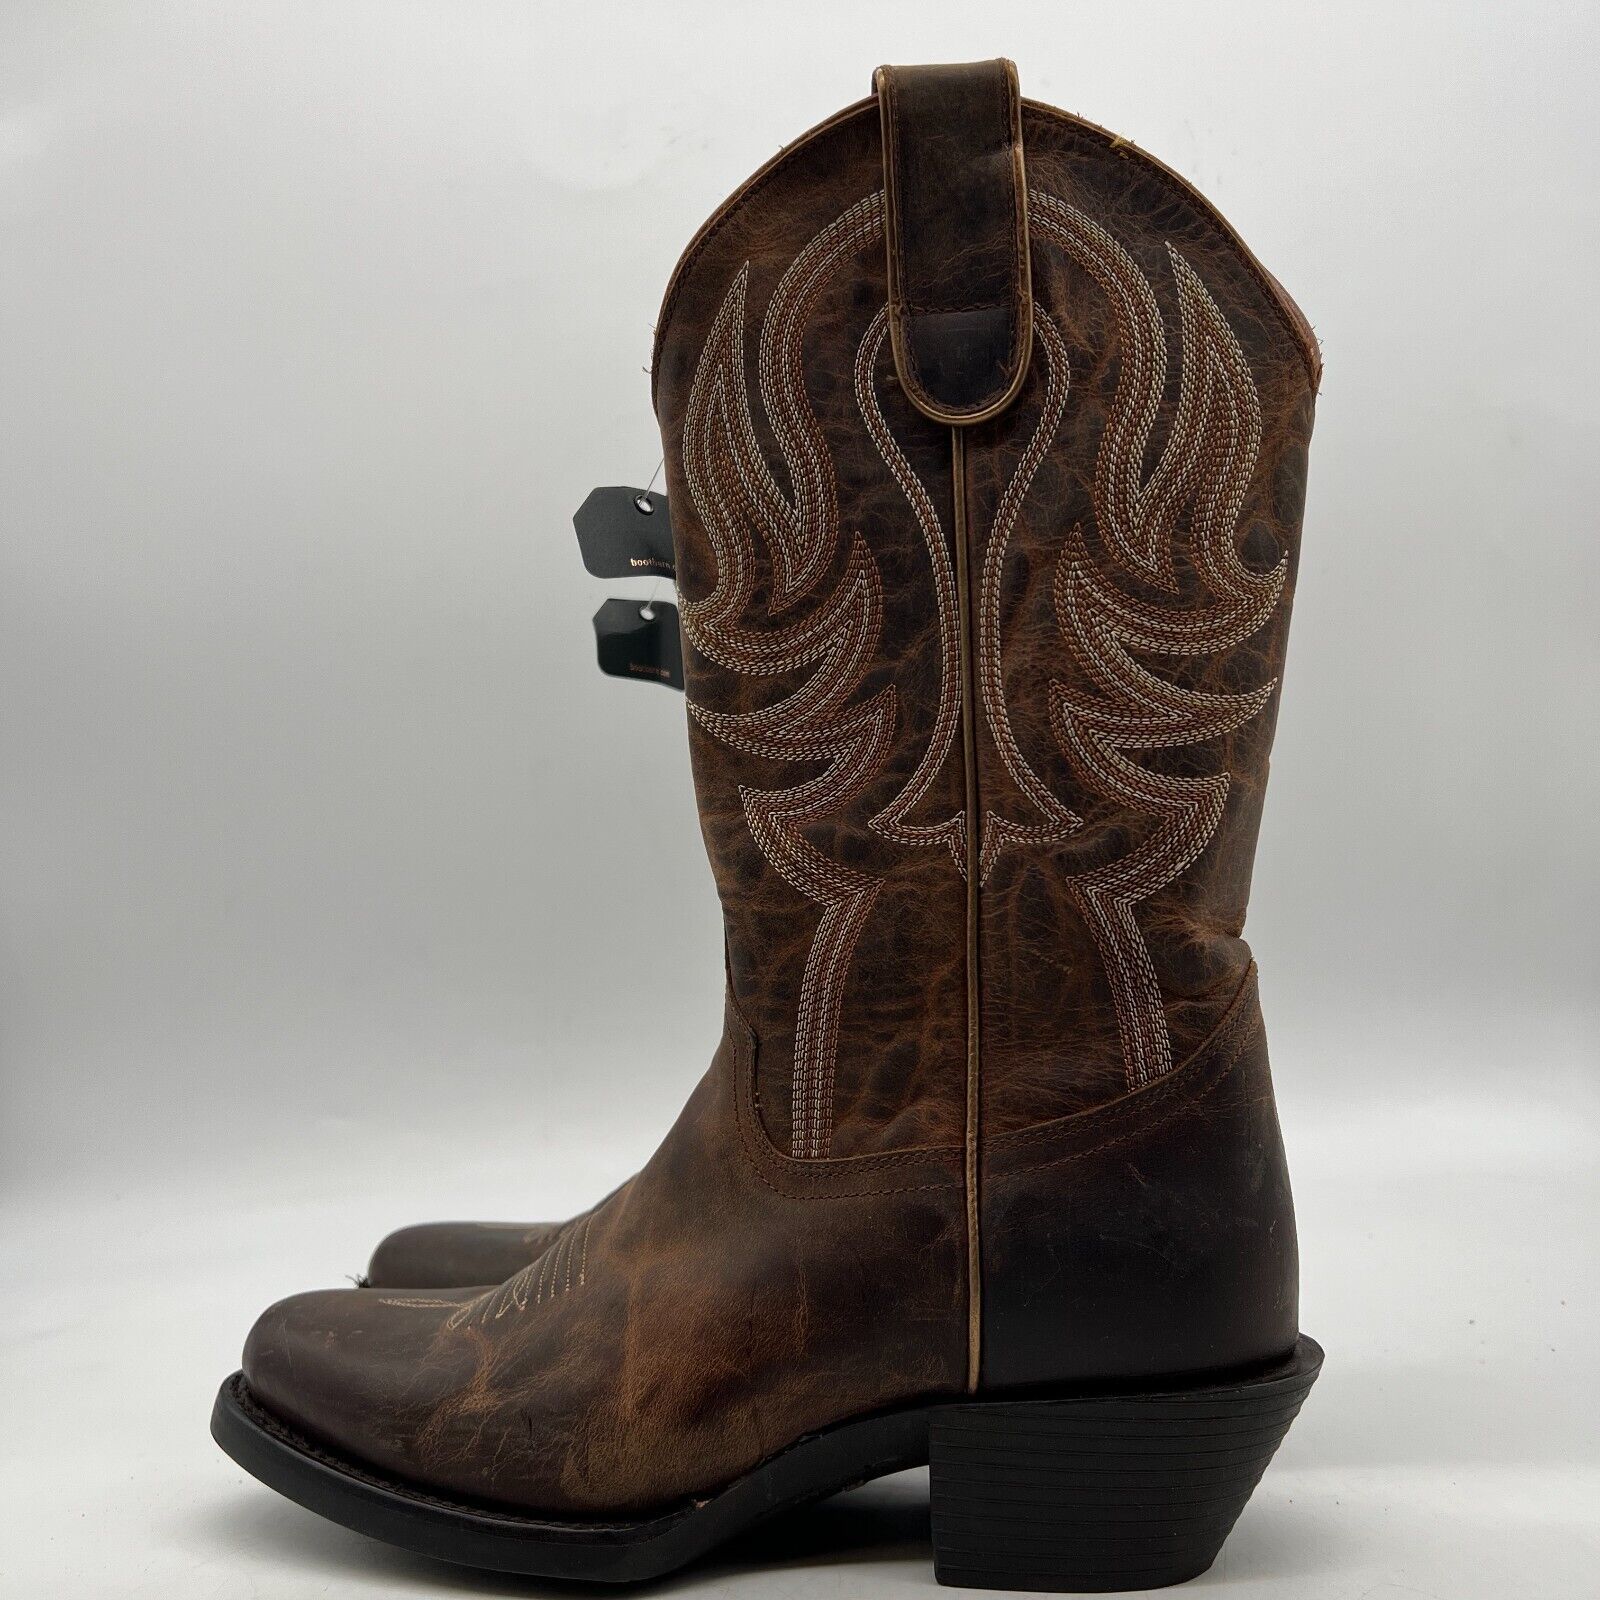 Primary image for Shyanne Morgan Xero Gravity BSWSP21P1 Womens Brown Western Boots Size 7.5 M